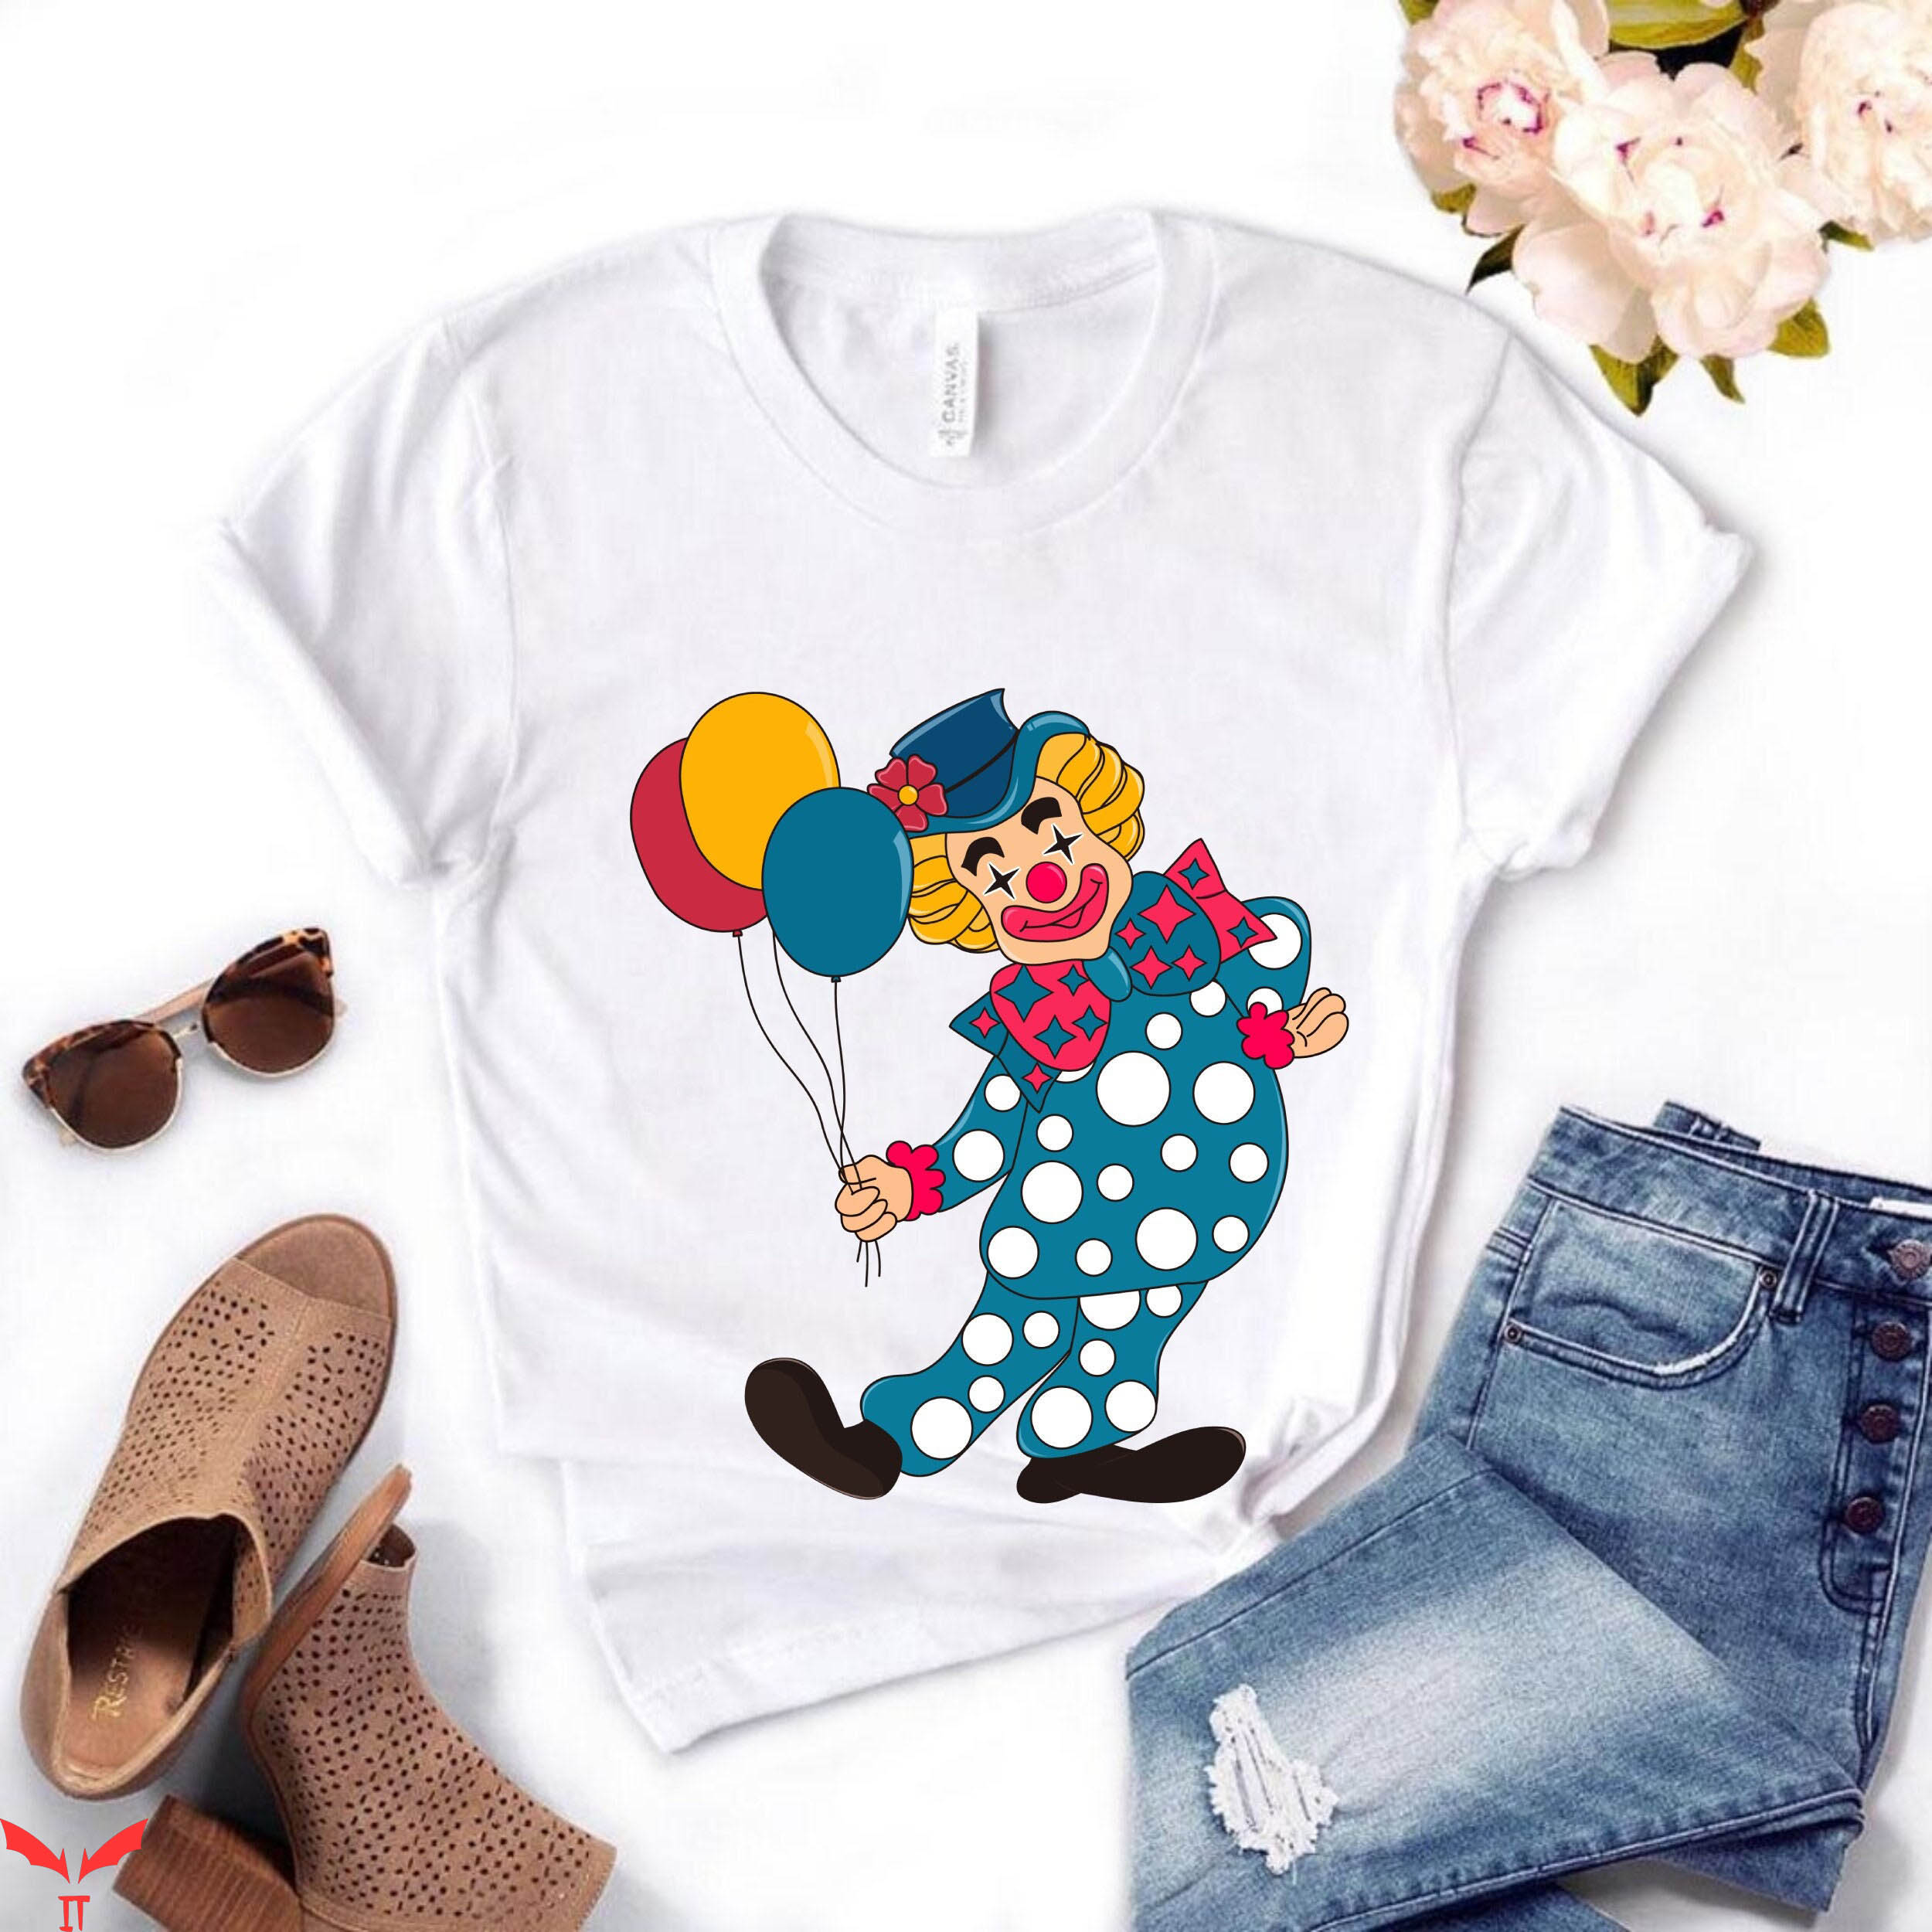 IT The Clown T-Shirt Happy Clown With Colorful Balloons